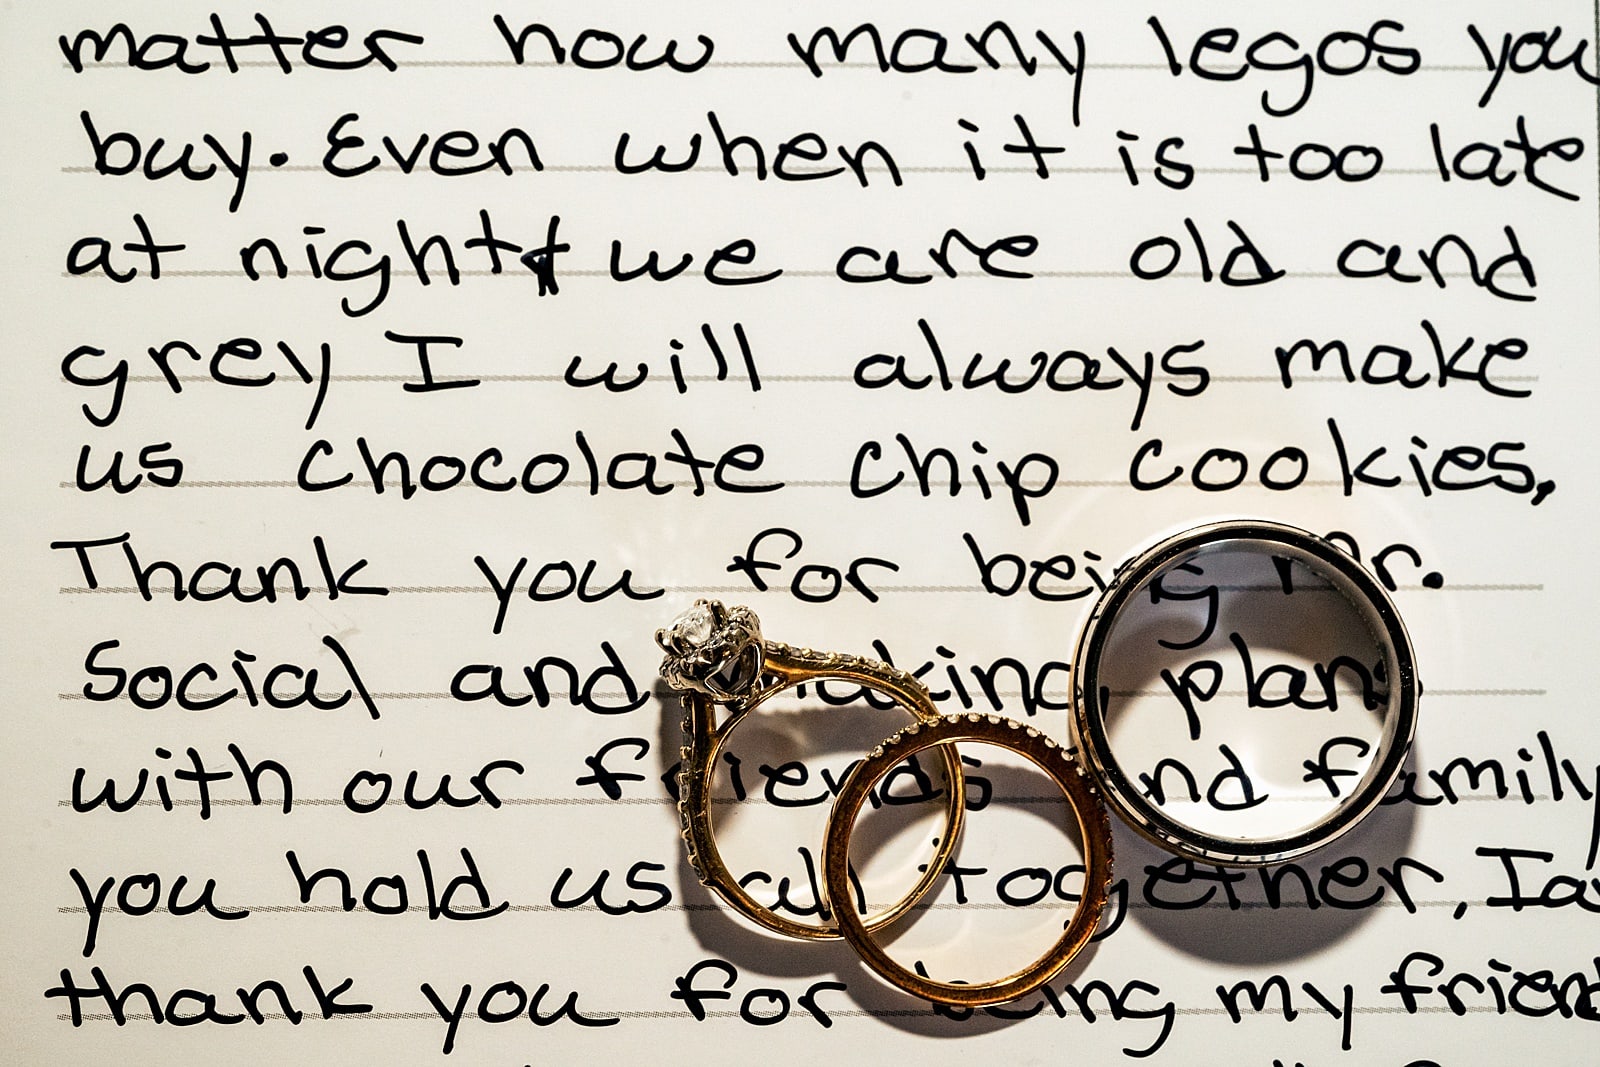 hand written vows are perfection!! Make them yours <3